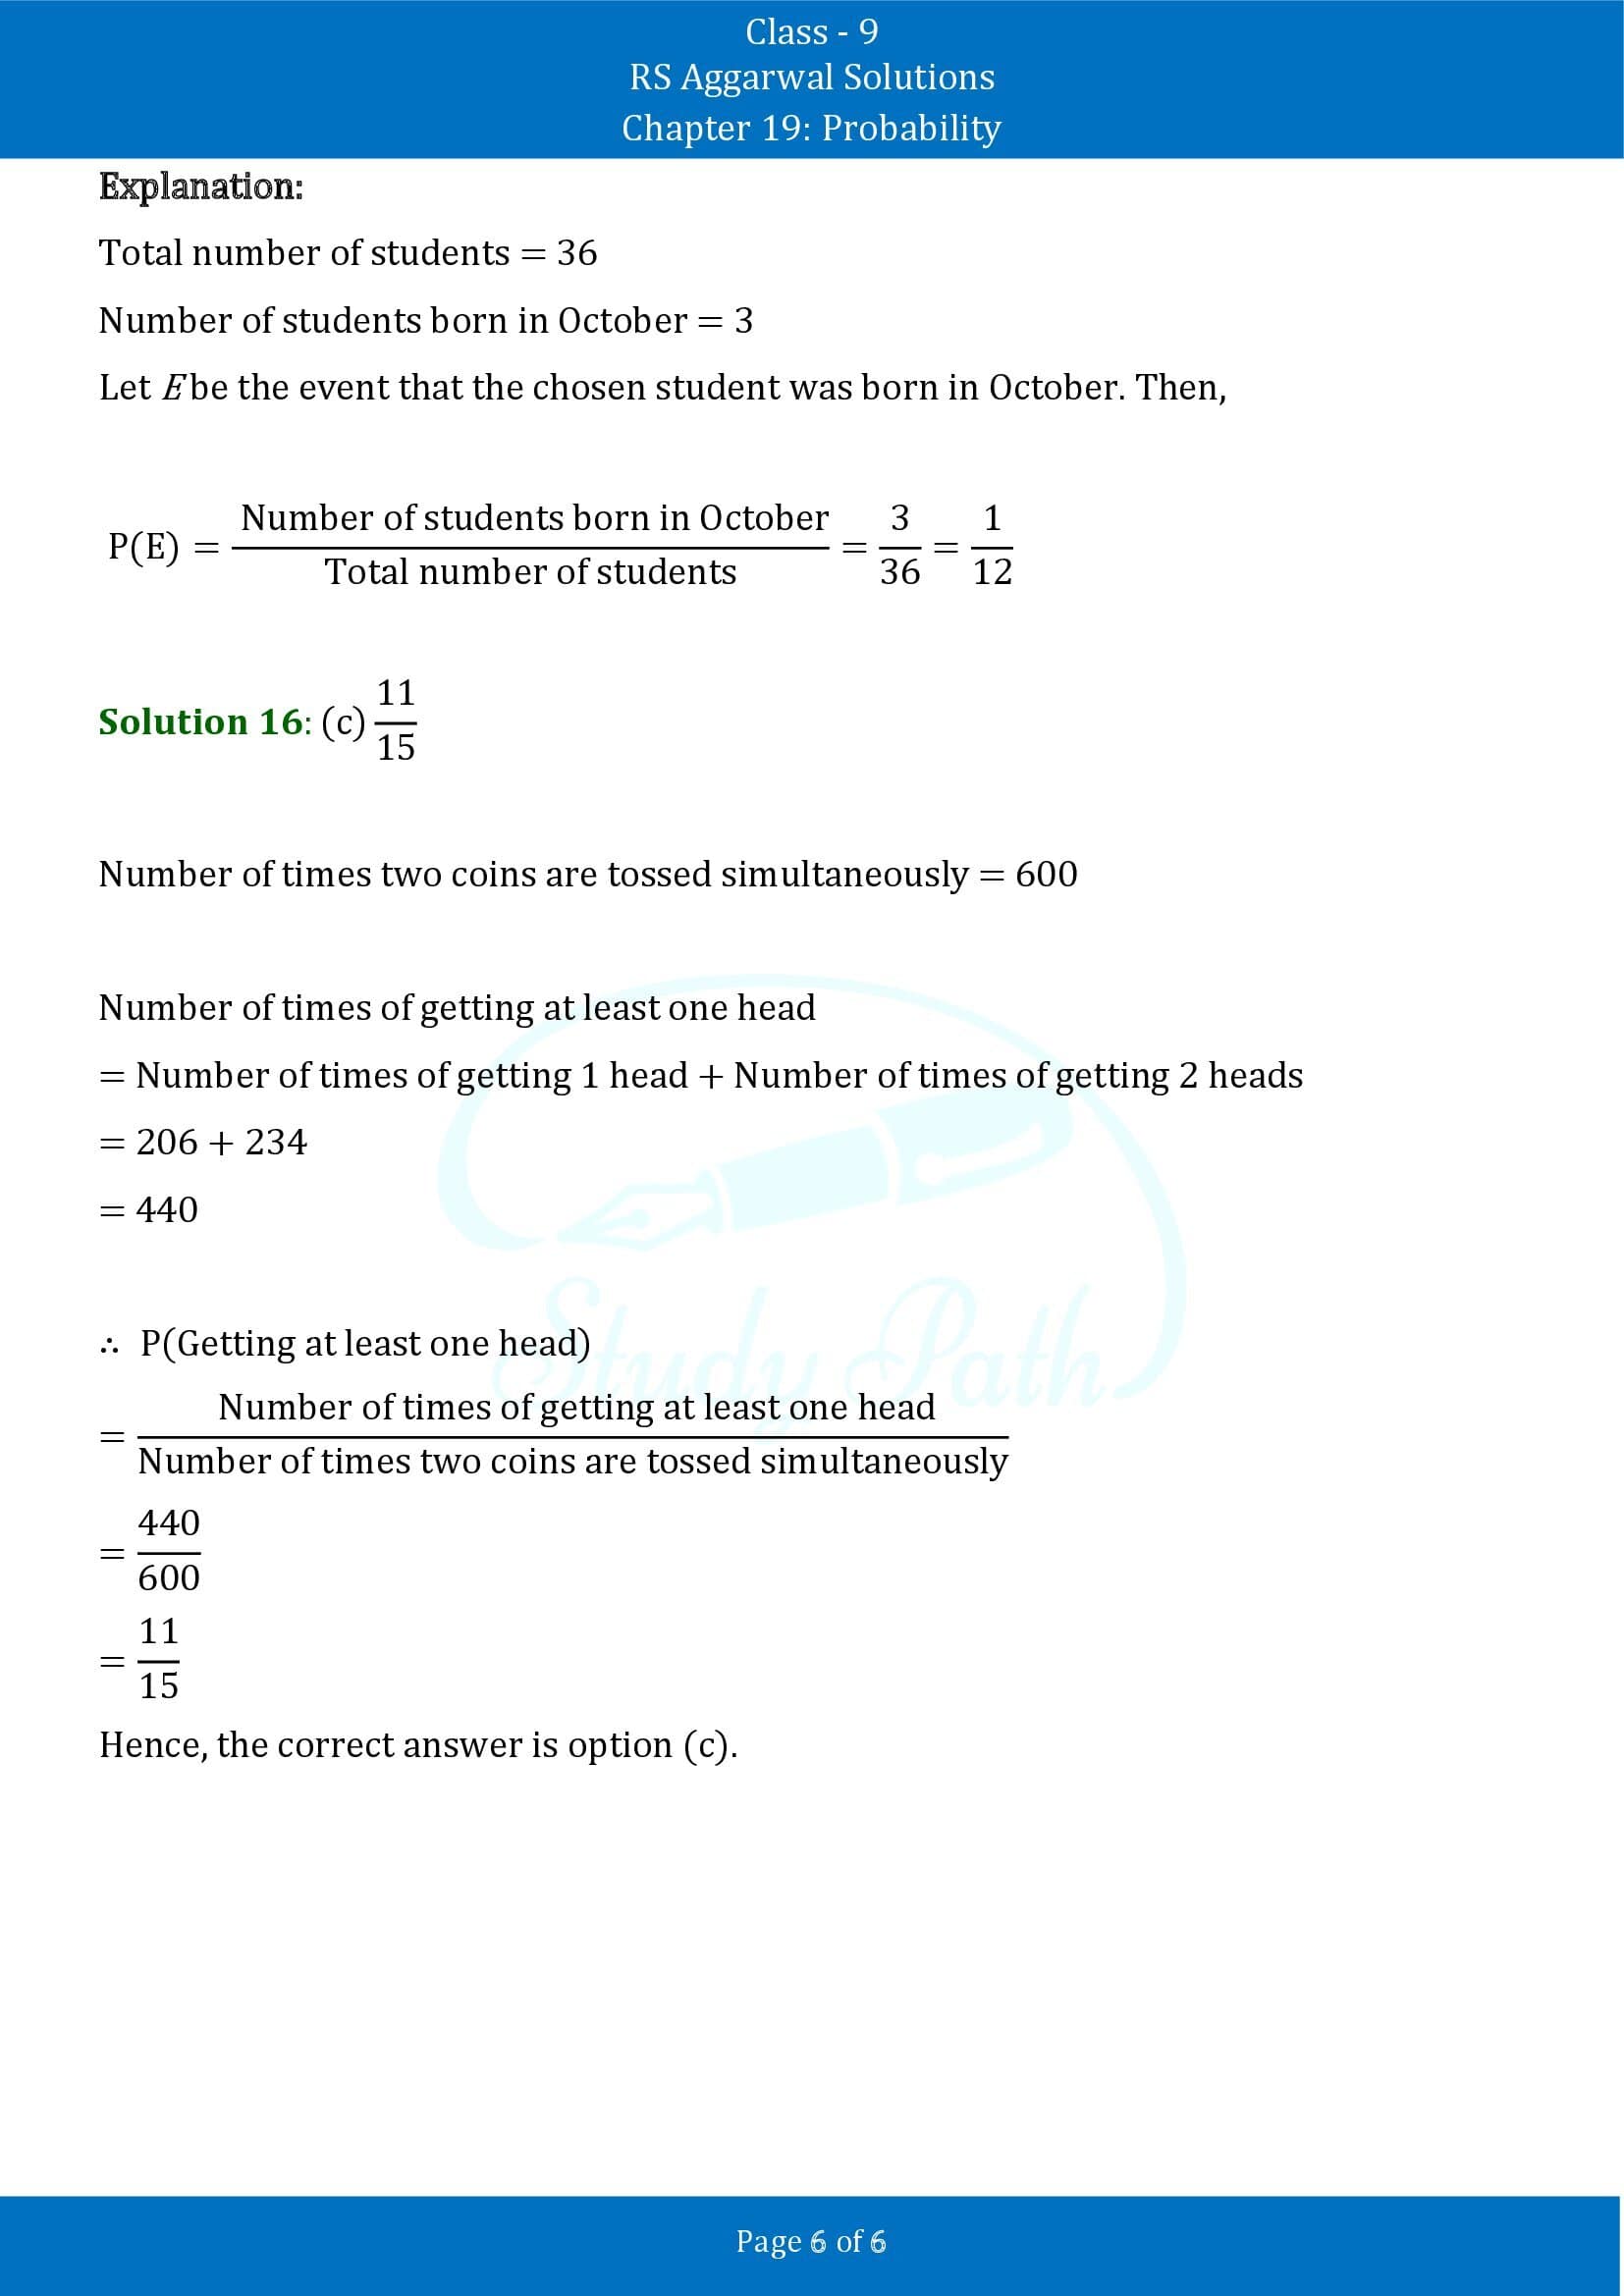 RS Aggarwal Solutions Class 9 Chapter 19 Probability Multiple Choice Questions MCQs 00006